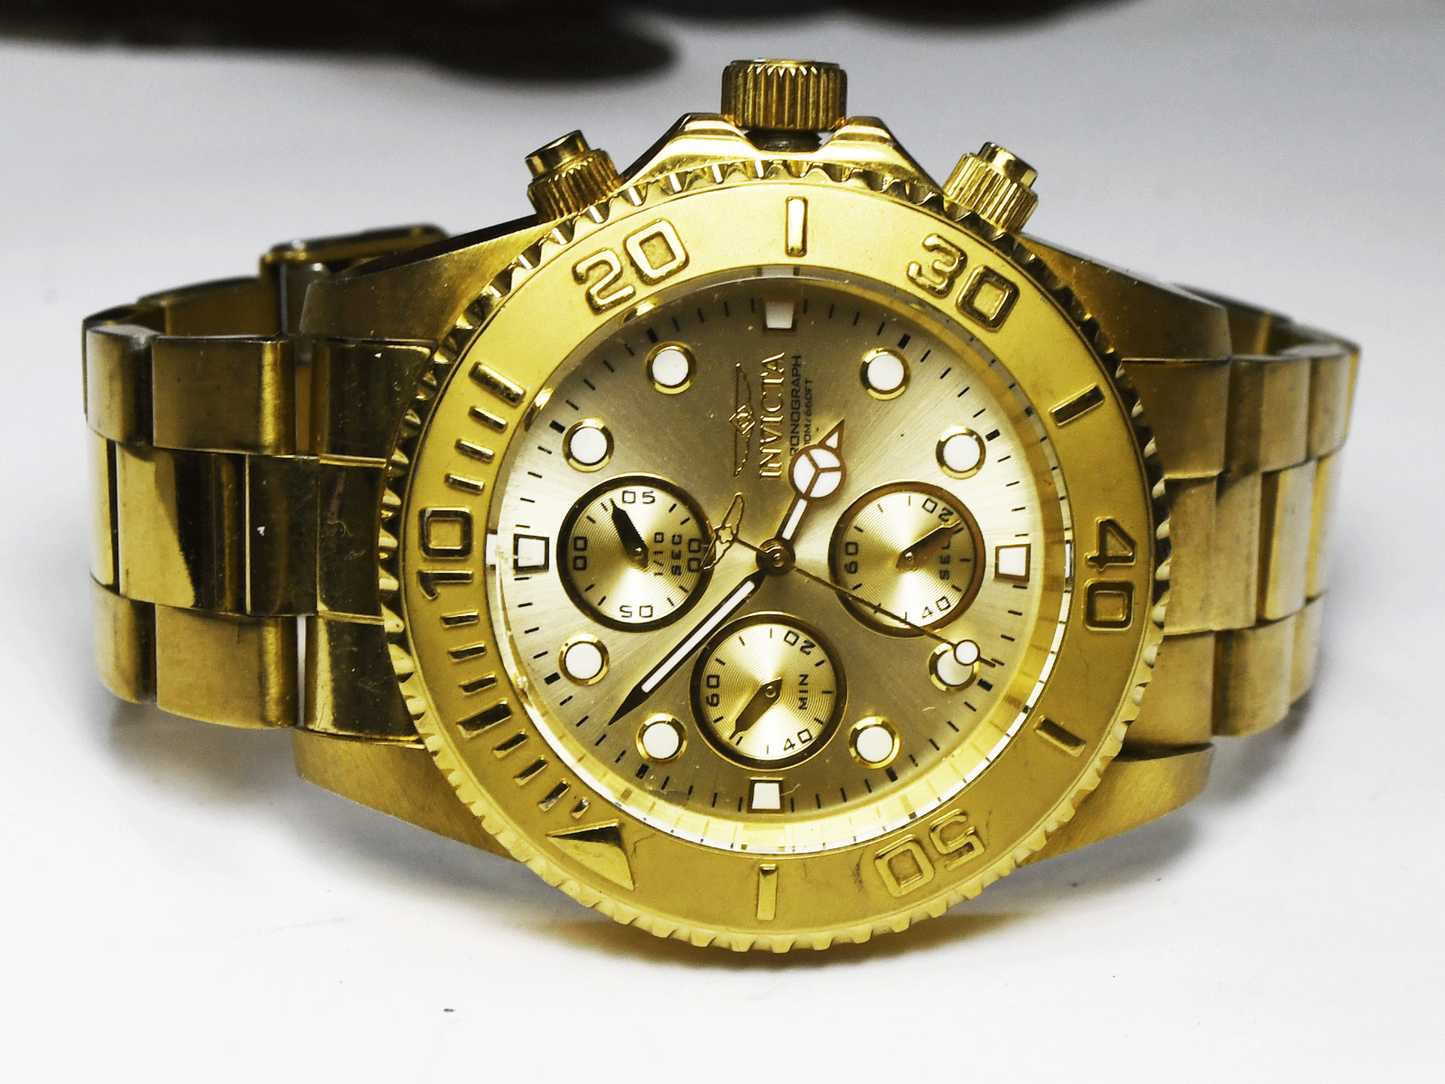 Invicta Pro Diver 1774 Gold Tone Stainless Split Second Chrongraph 45mm Watch